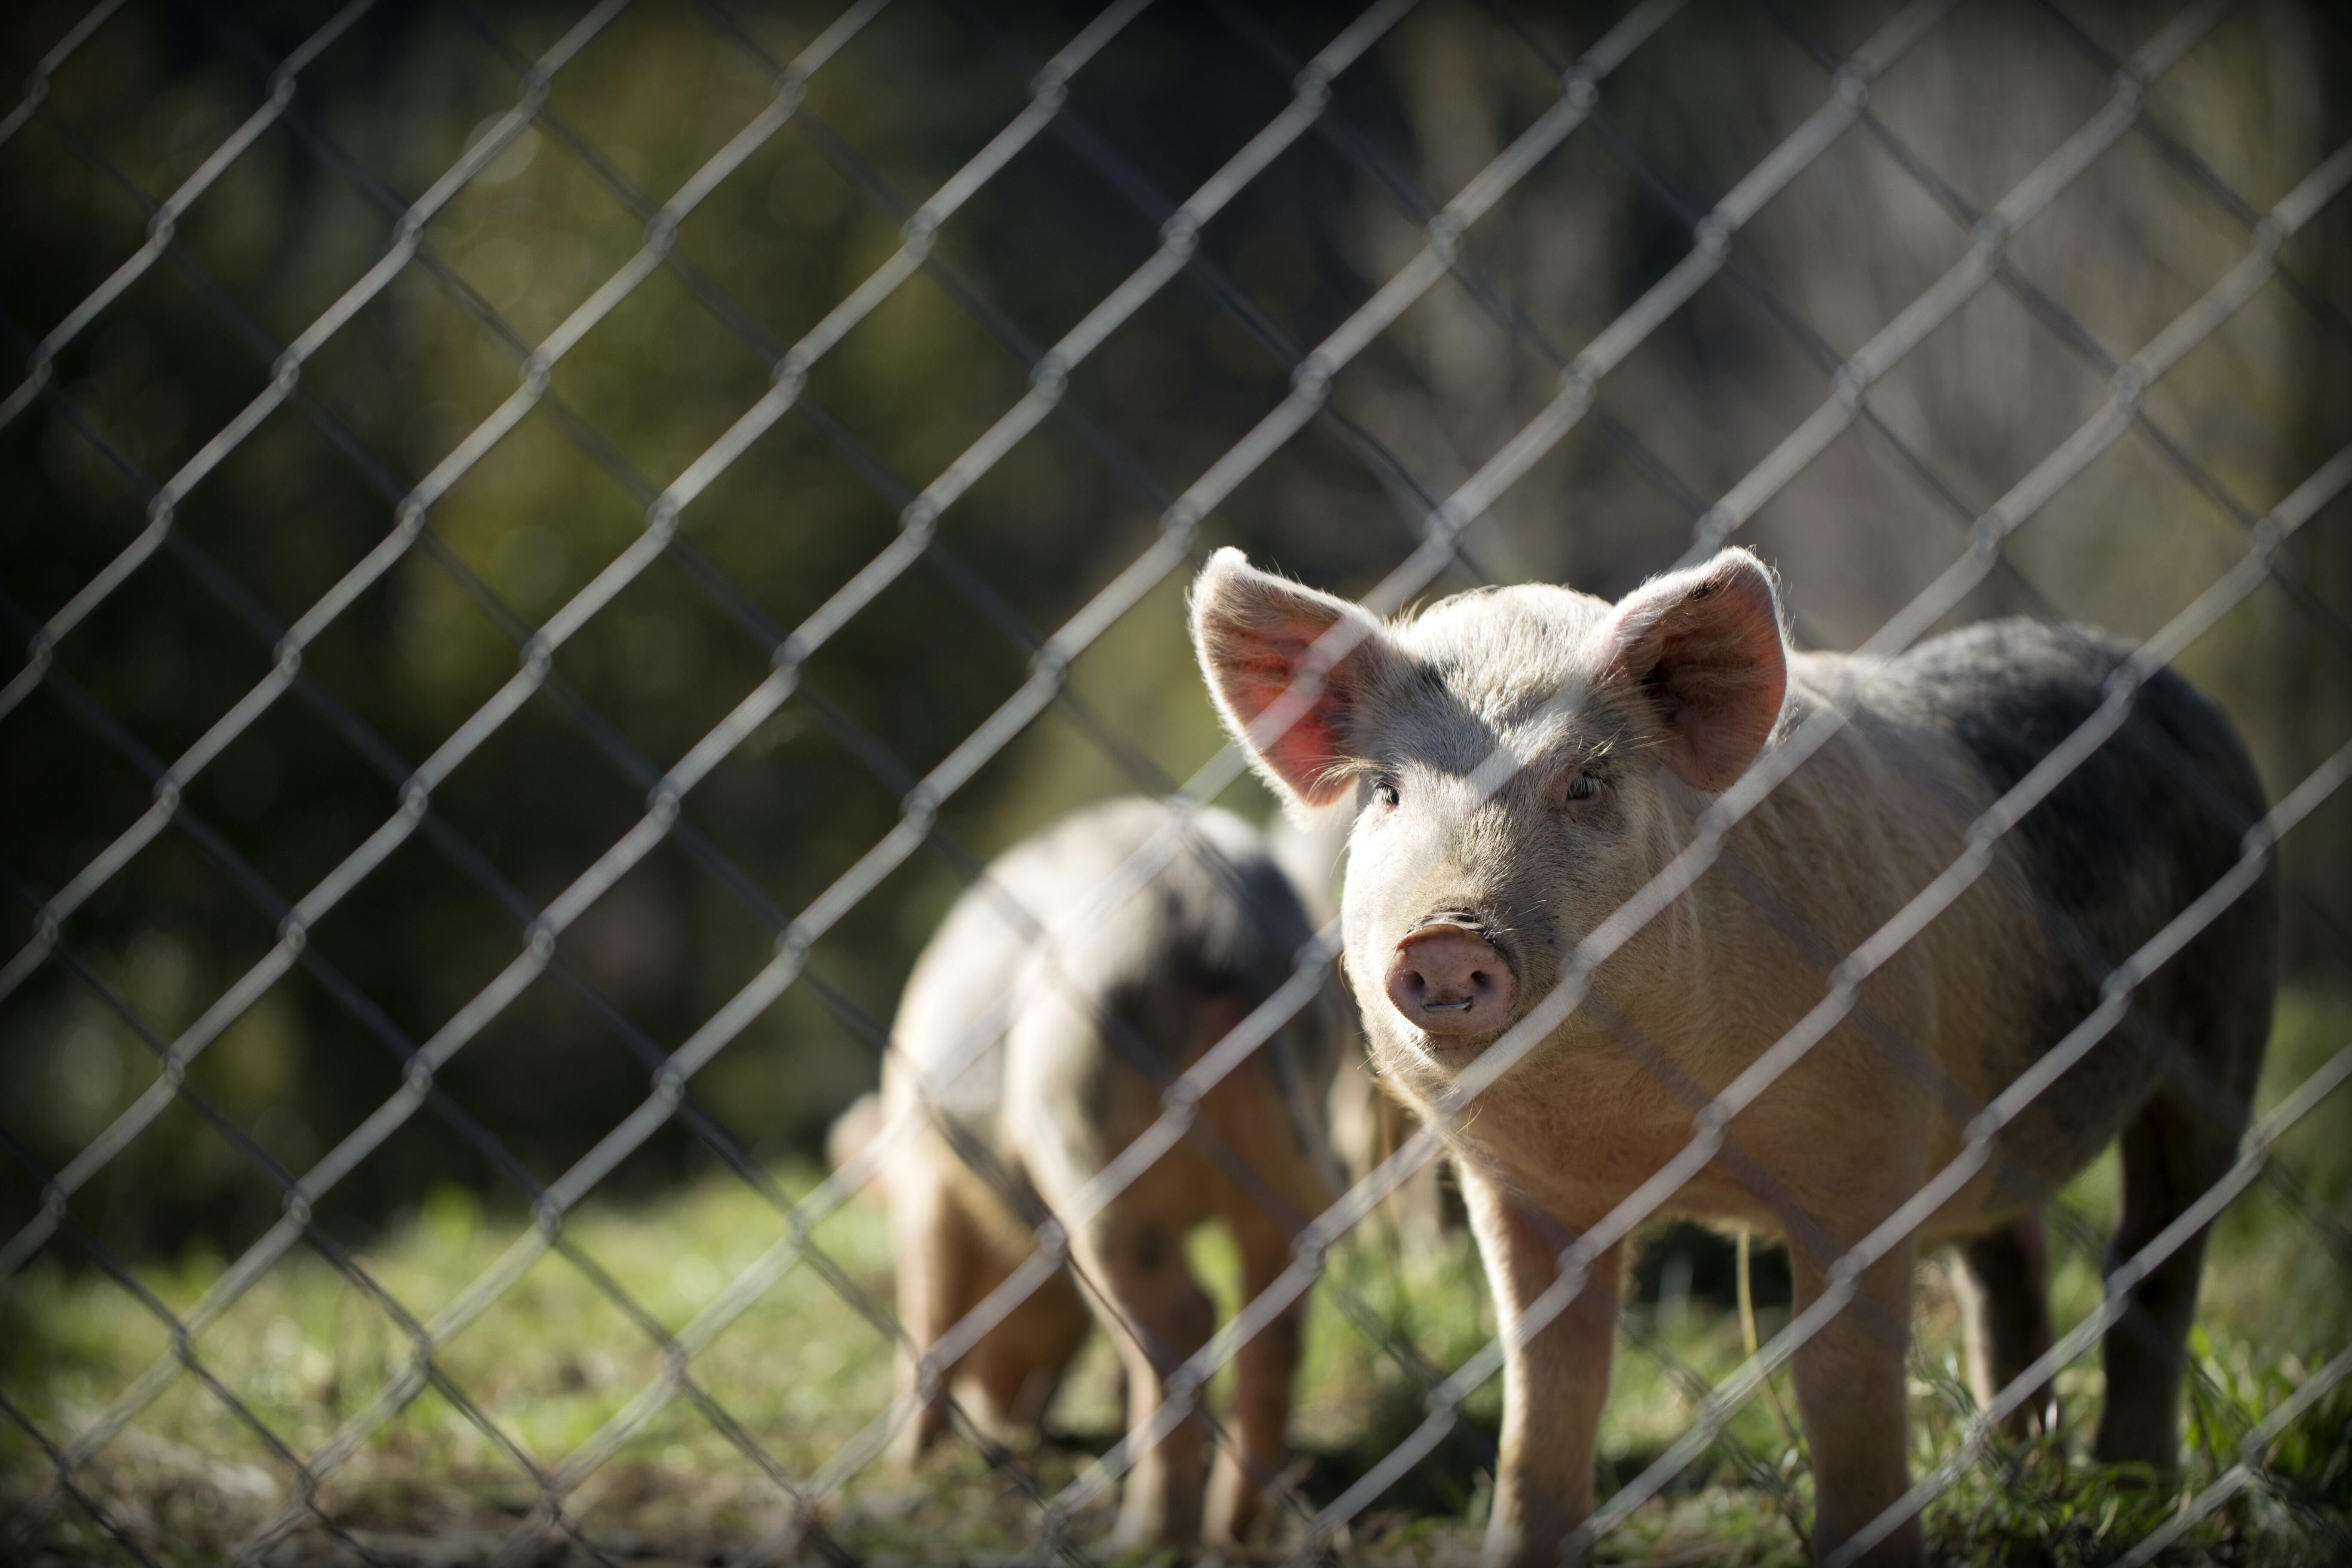 Huawei is turning to pig farms and mines to make up for the revenue it is losing from its smartphone business - Looking to replace lost smartphone sales, Huawei turns to pig farming